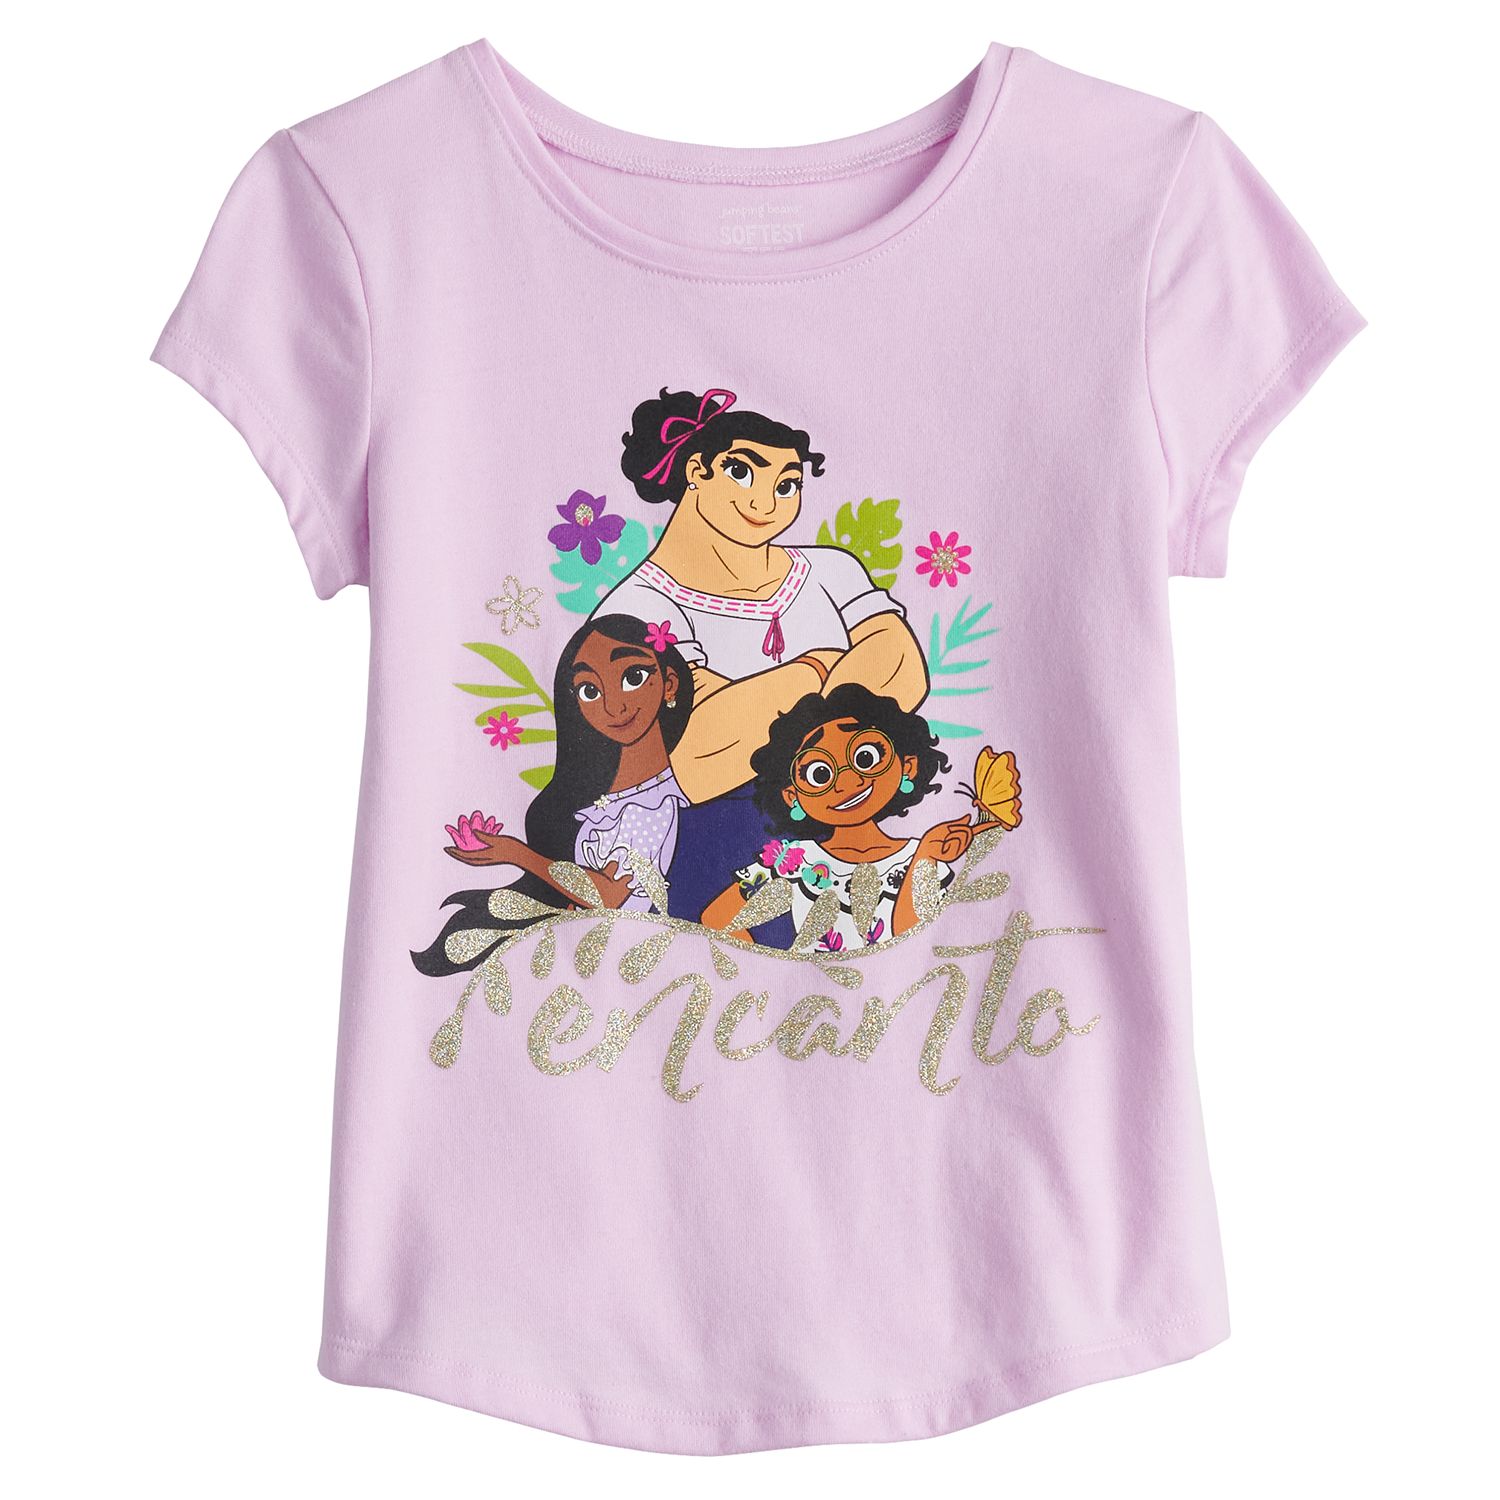 Image for Disney/Jumping Beans Disney's Encanto Toddler Girl Shirttail Tee by Jumping Beans® at Kohl's.